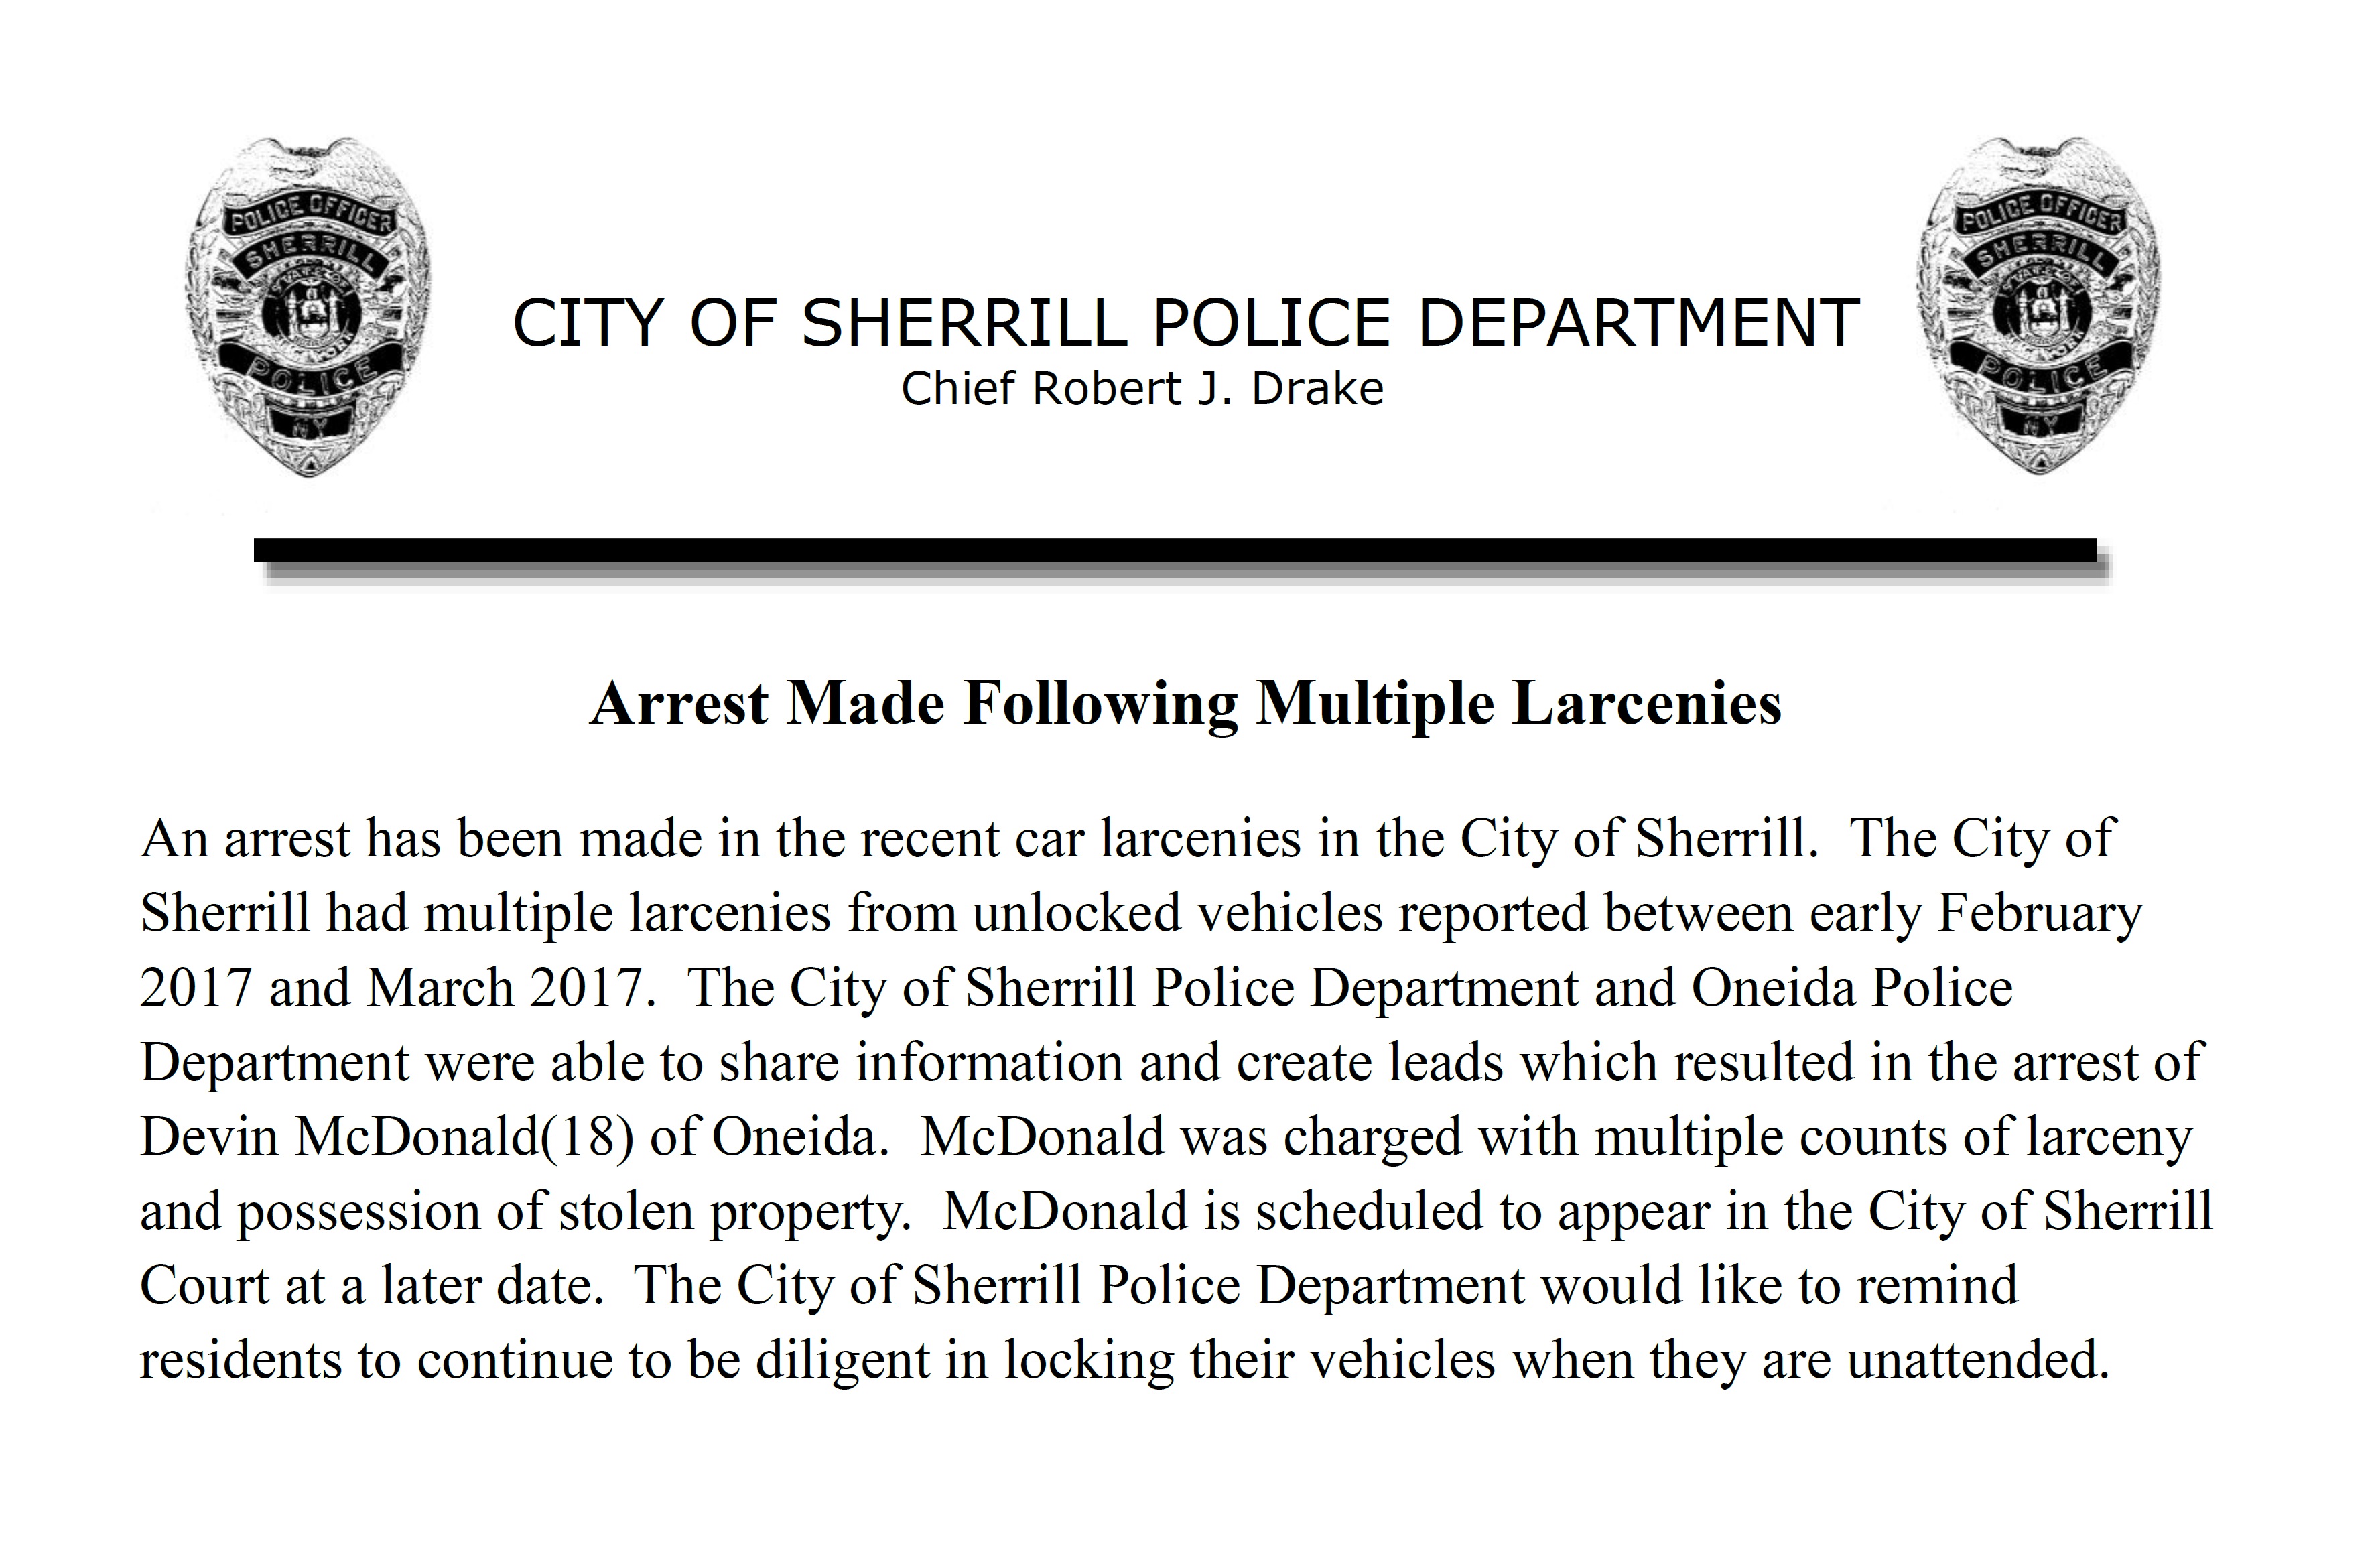 Police Department Press Release